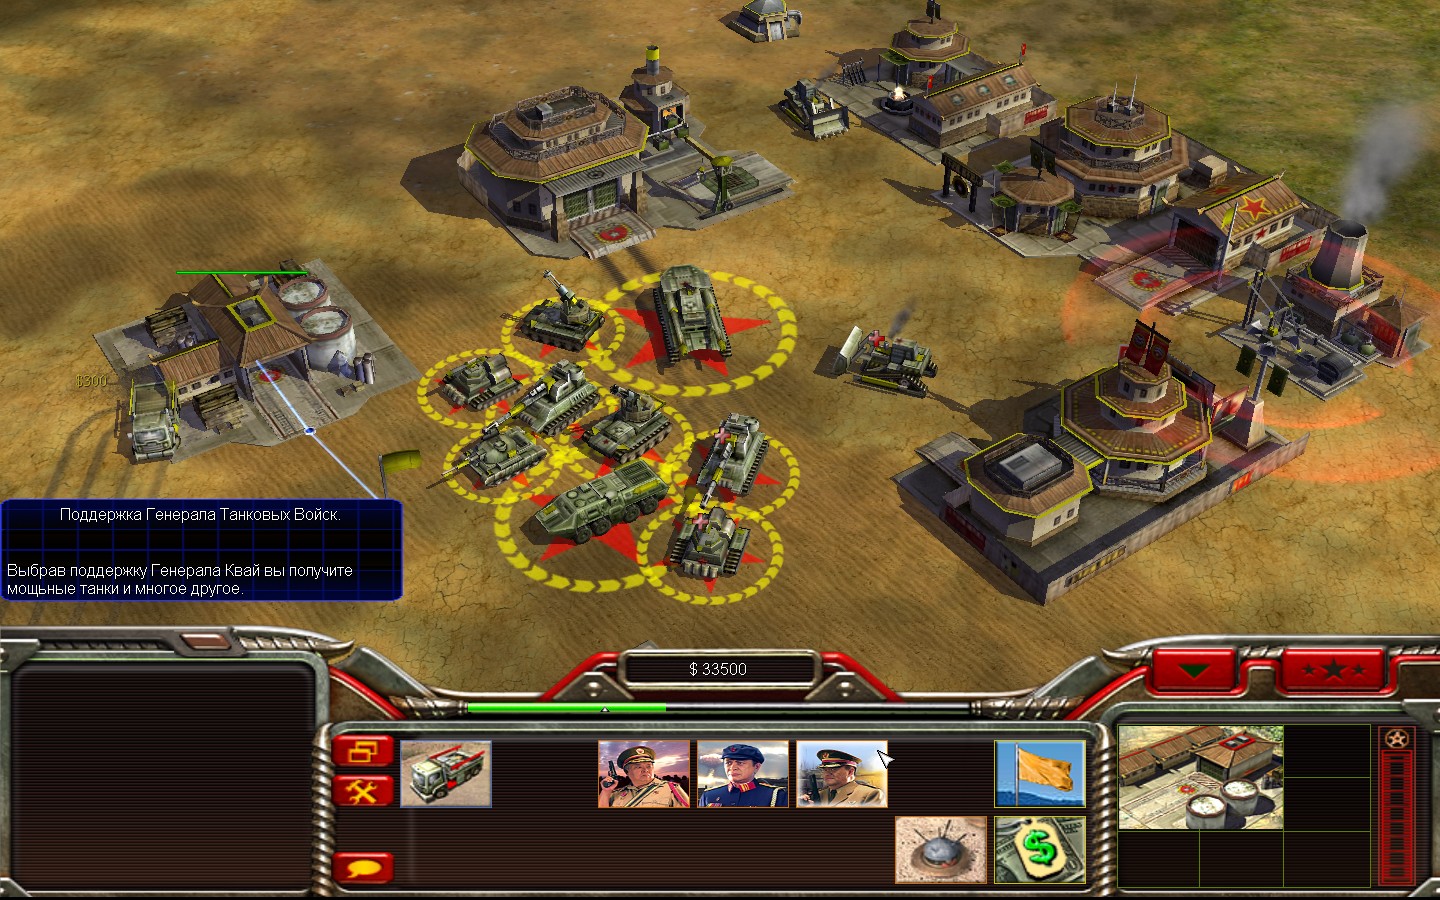 Command conquer читы. C&C: Generals перезарядка (2006). Command & Conquer: Generals 2005. C&C: Generals перезарядка (2005). Generals перезарядка (Reloaded Fire).